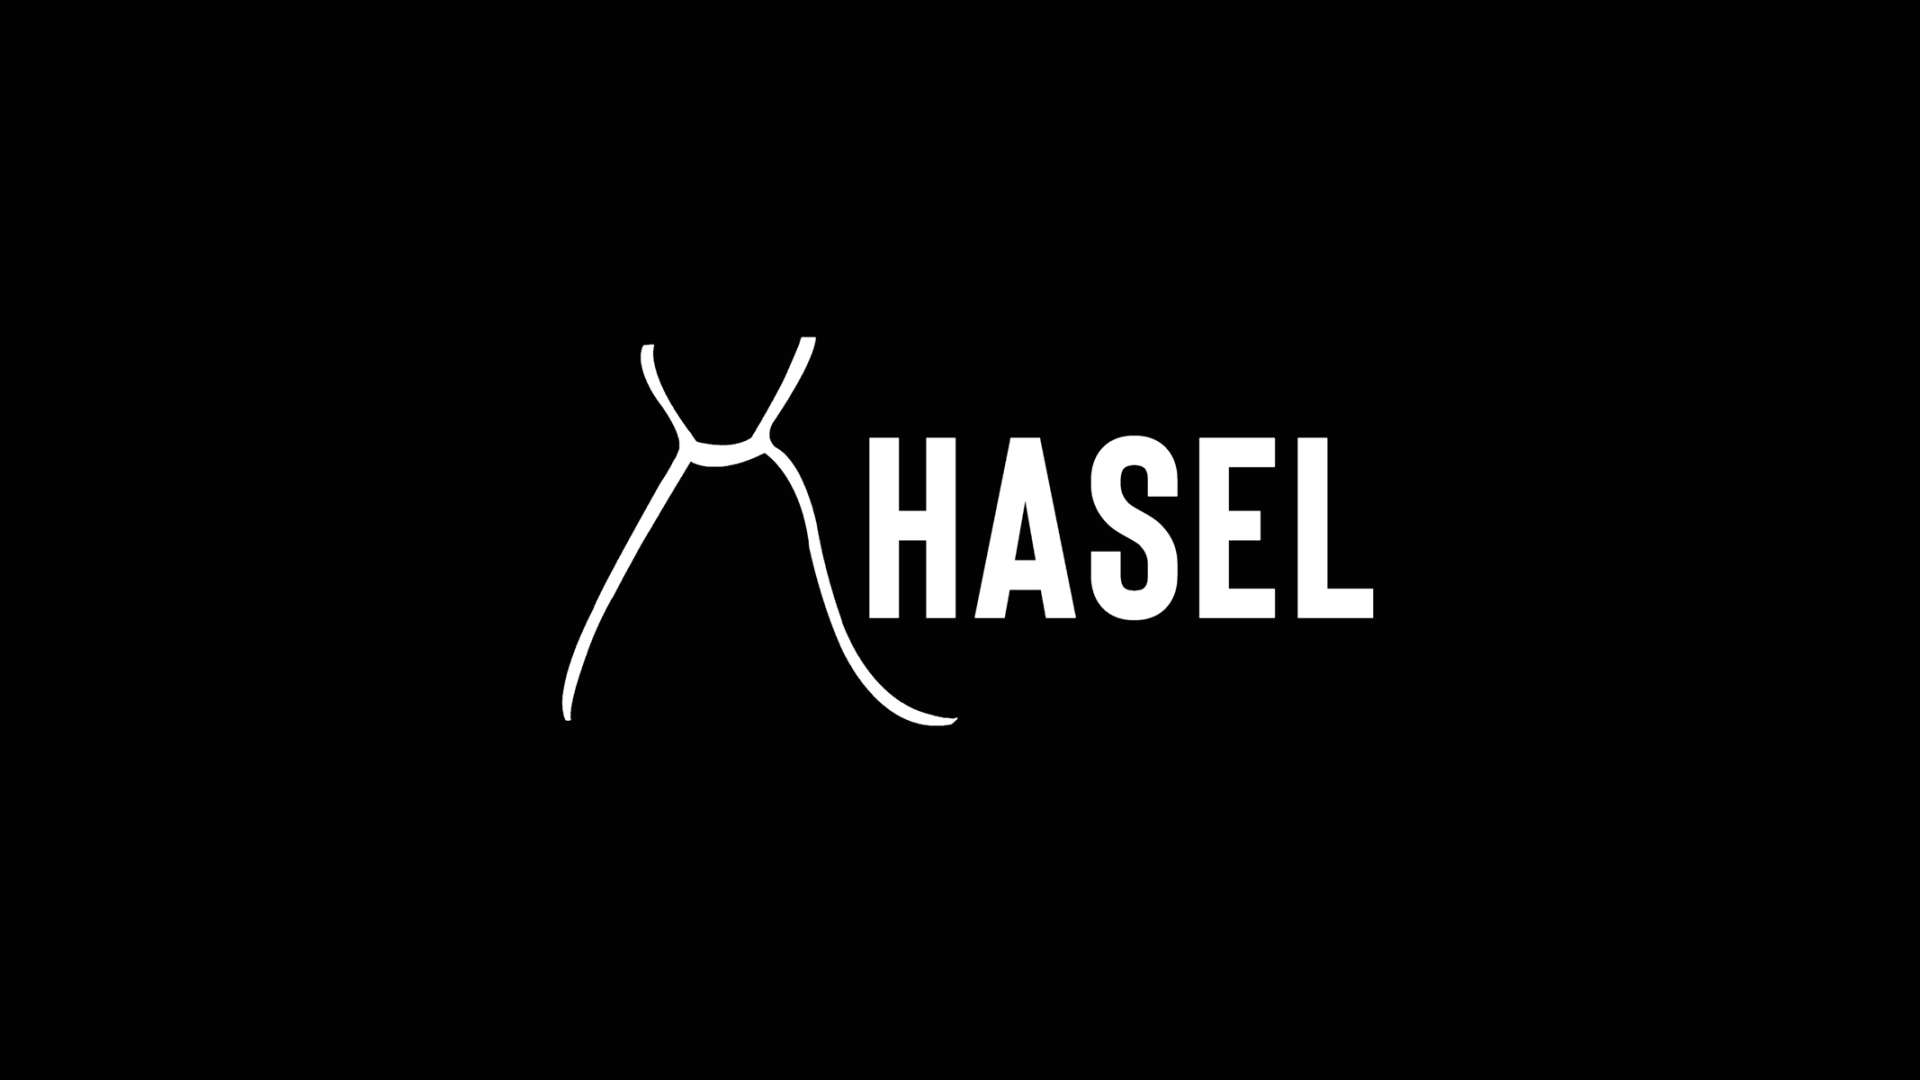 HASEL